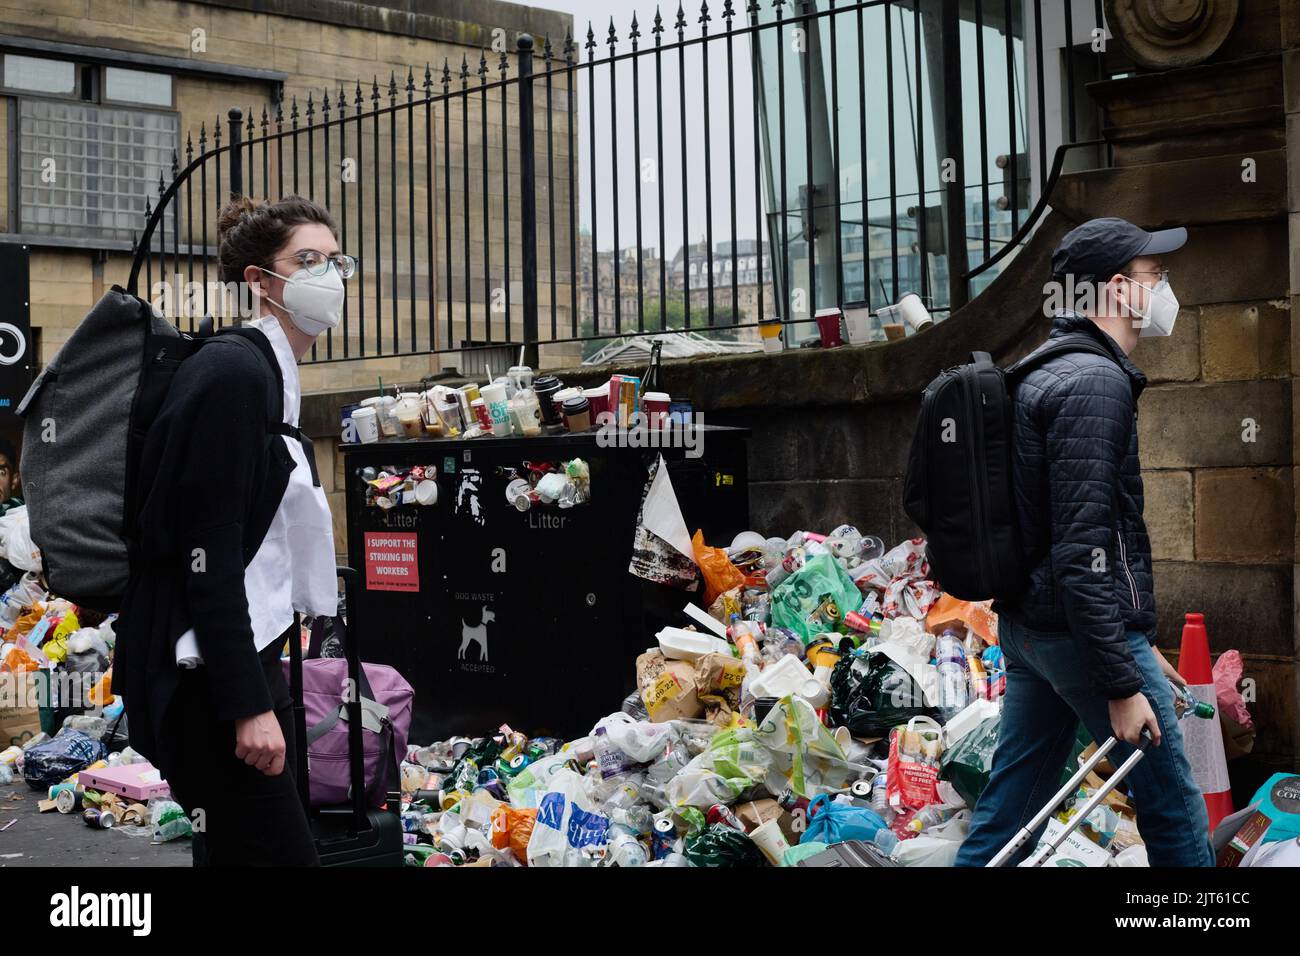 Edinburgh Scotland, UK 28 August 2022. Bins overflow with litter in the city centre due to strike action by workers. credit sst/alamy live news Stock Photo